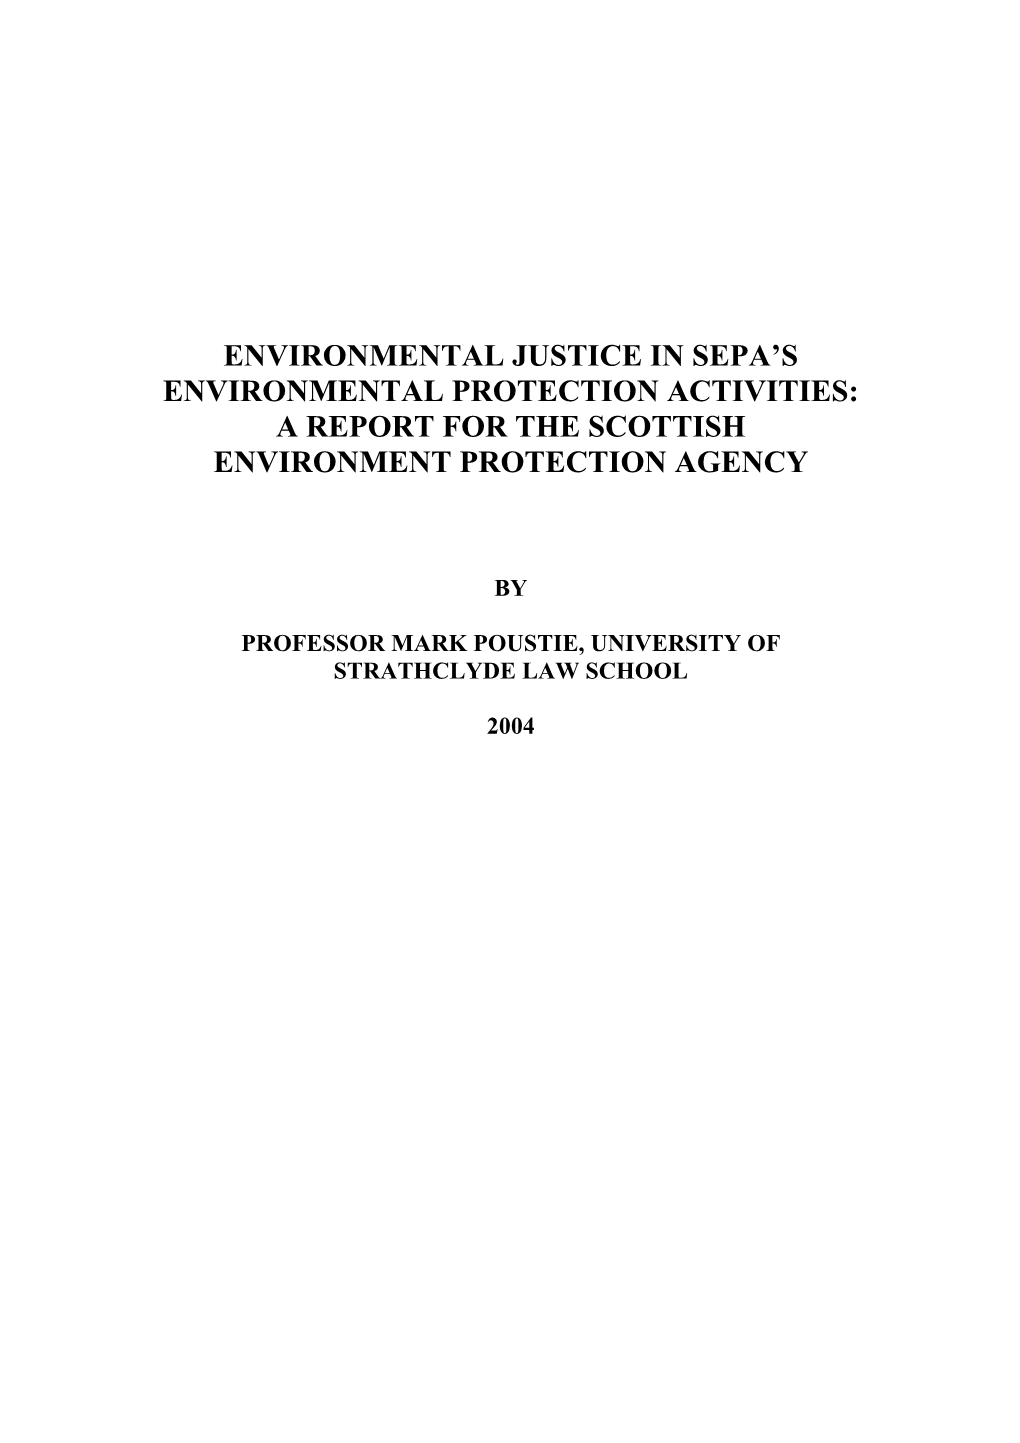 Environmental Justice in SEPA's Environmental Protection Activities